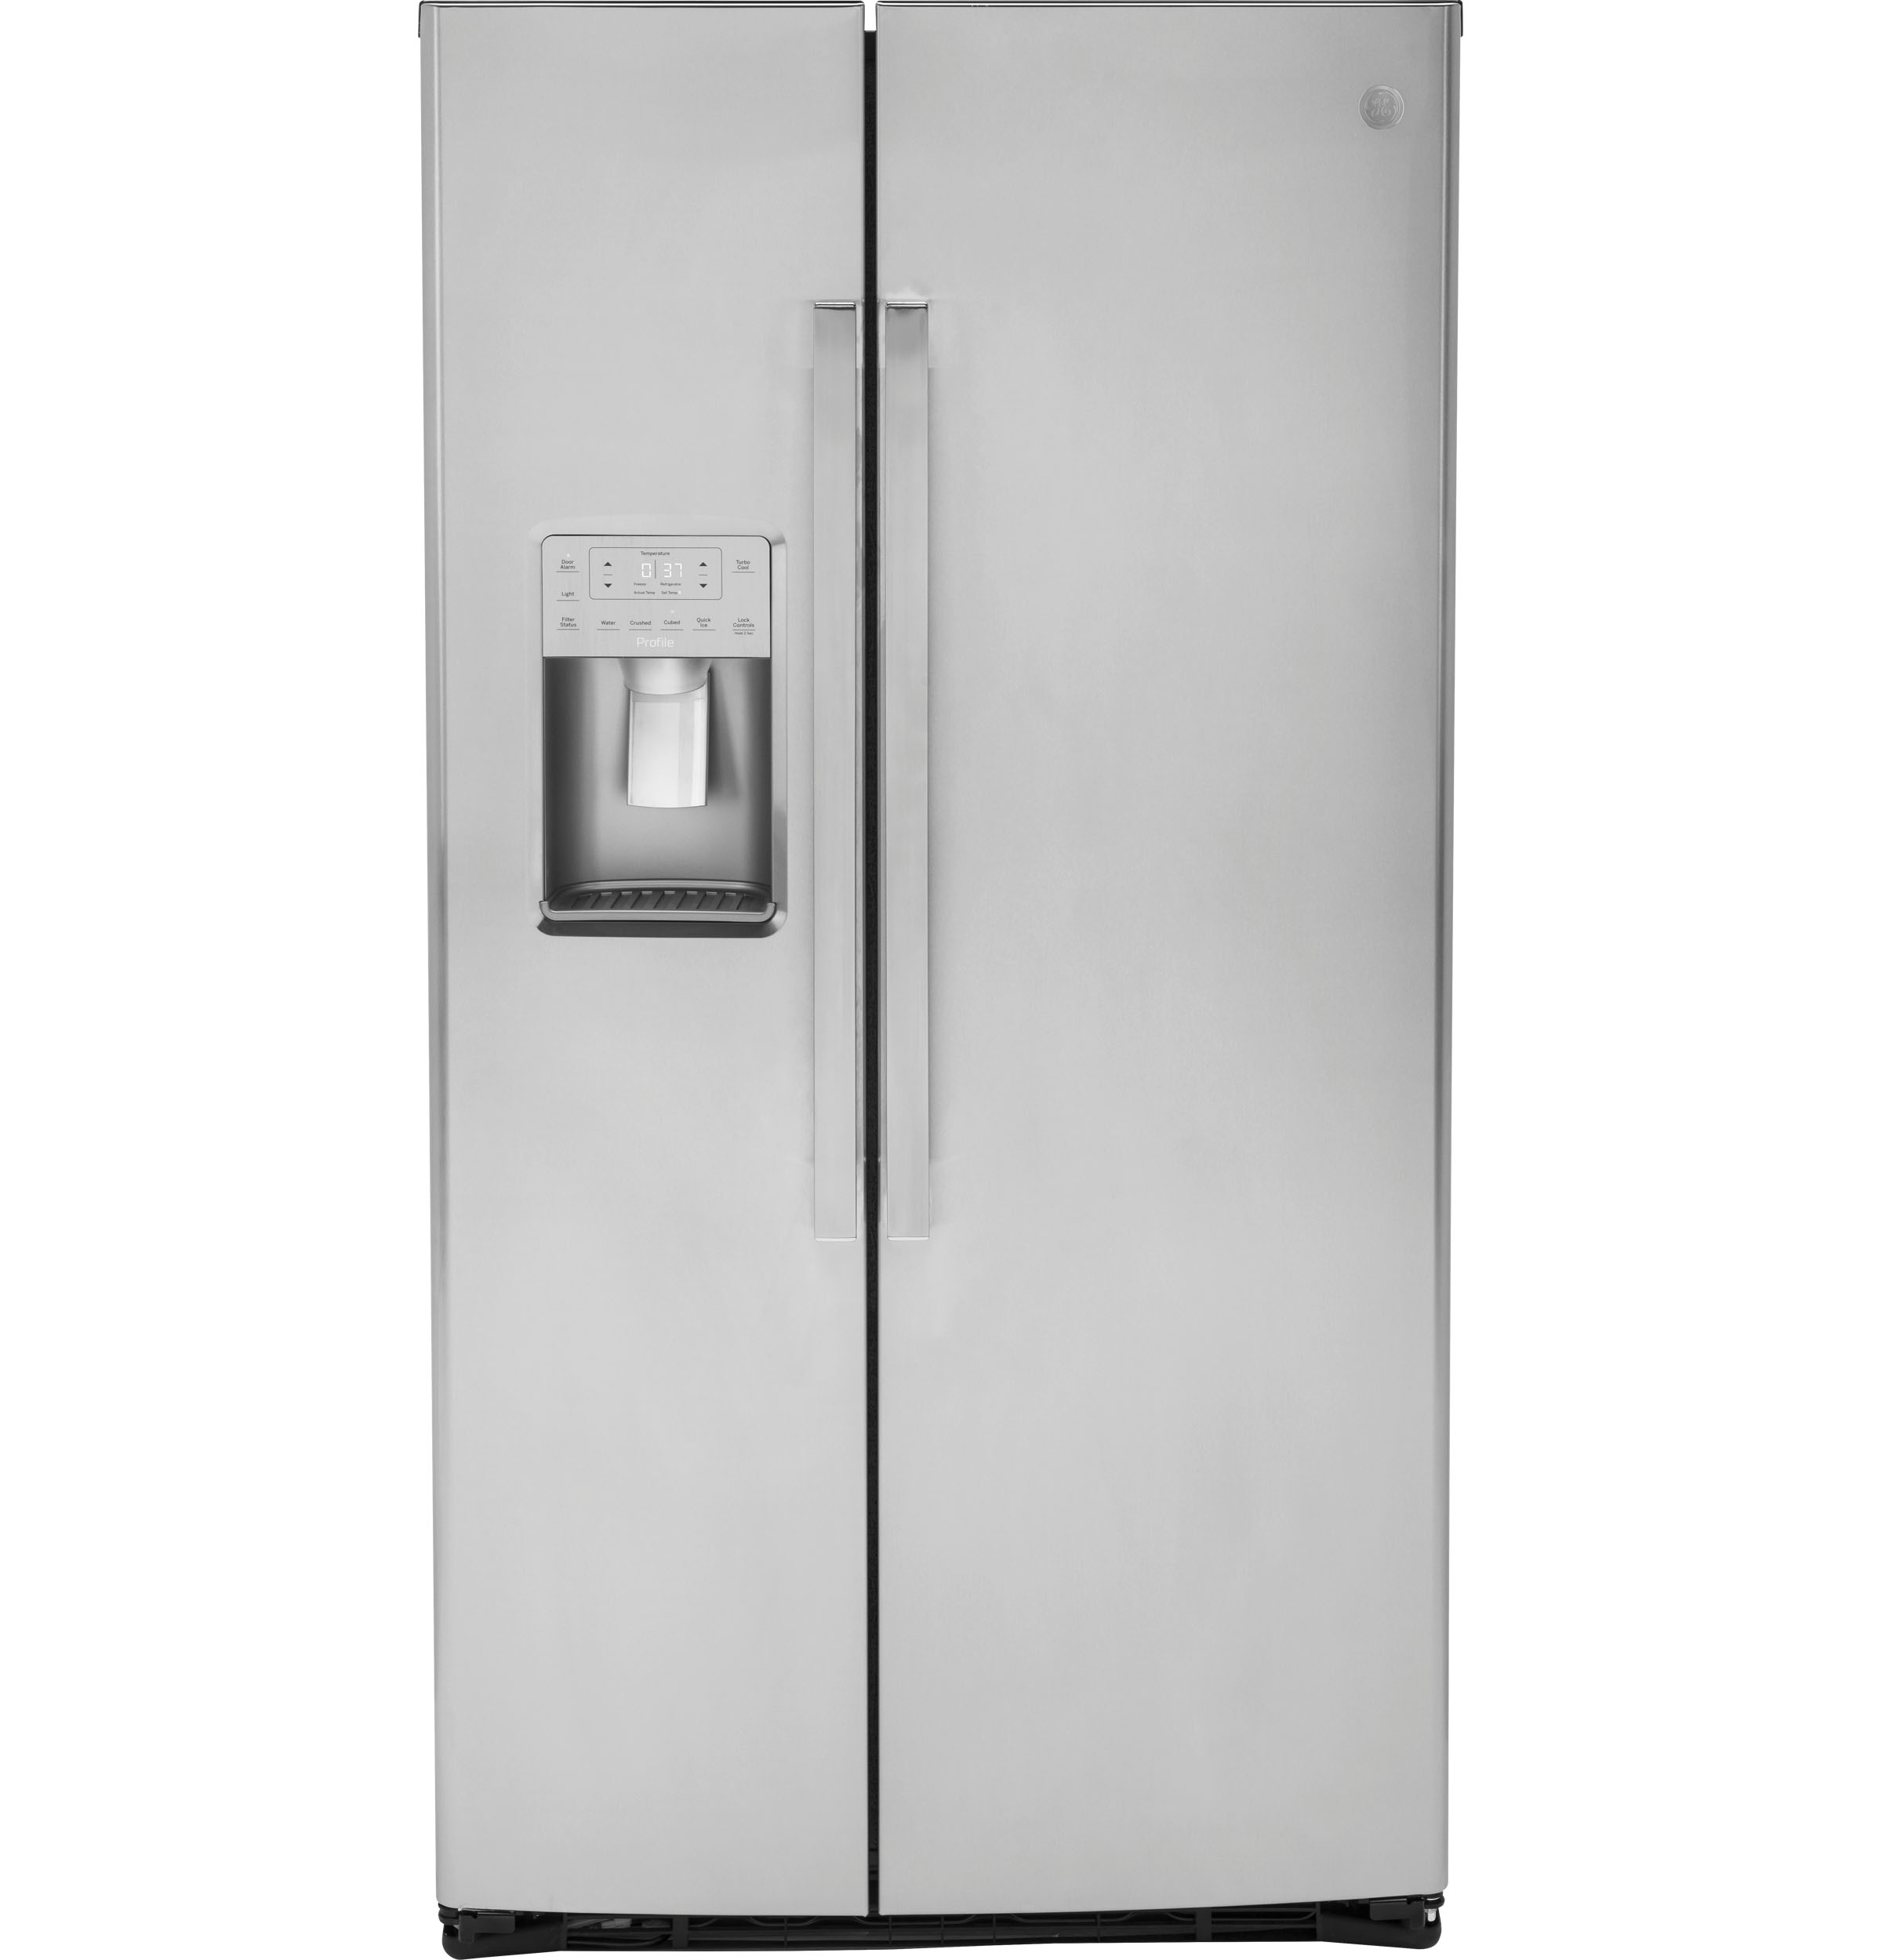 GE Profile™ Series ENERGY STAR® 25.3 Cu. Ft. Side-by-Side Refrigerator